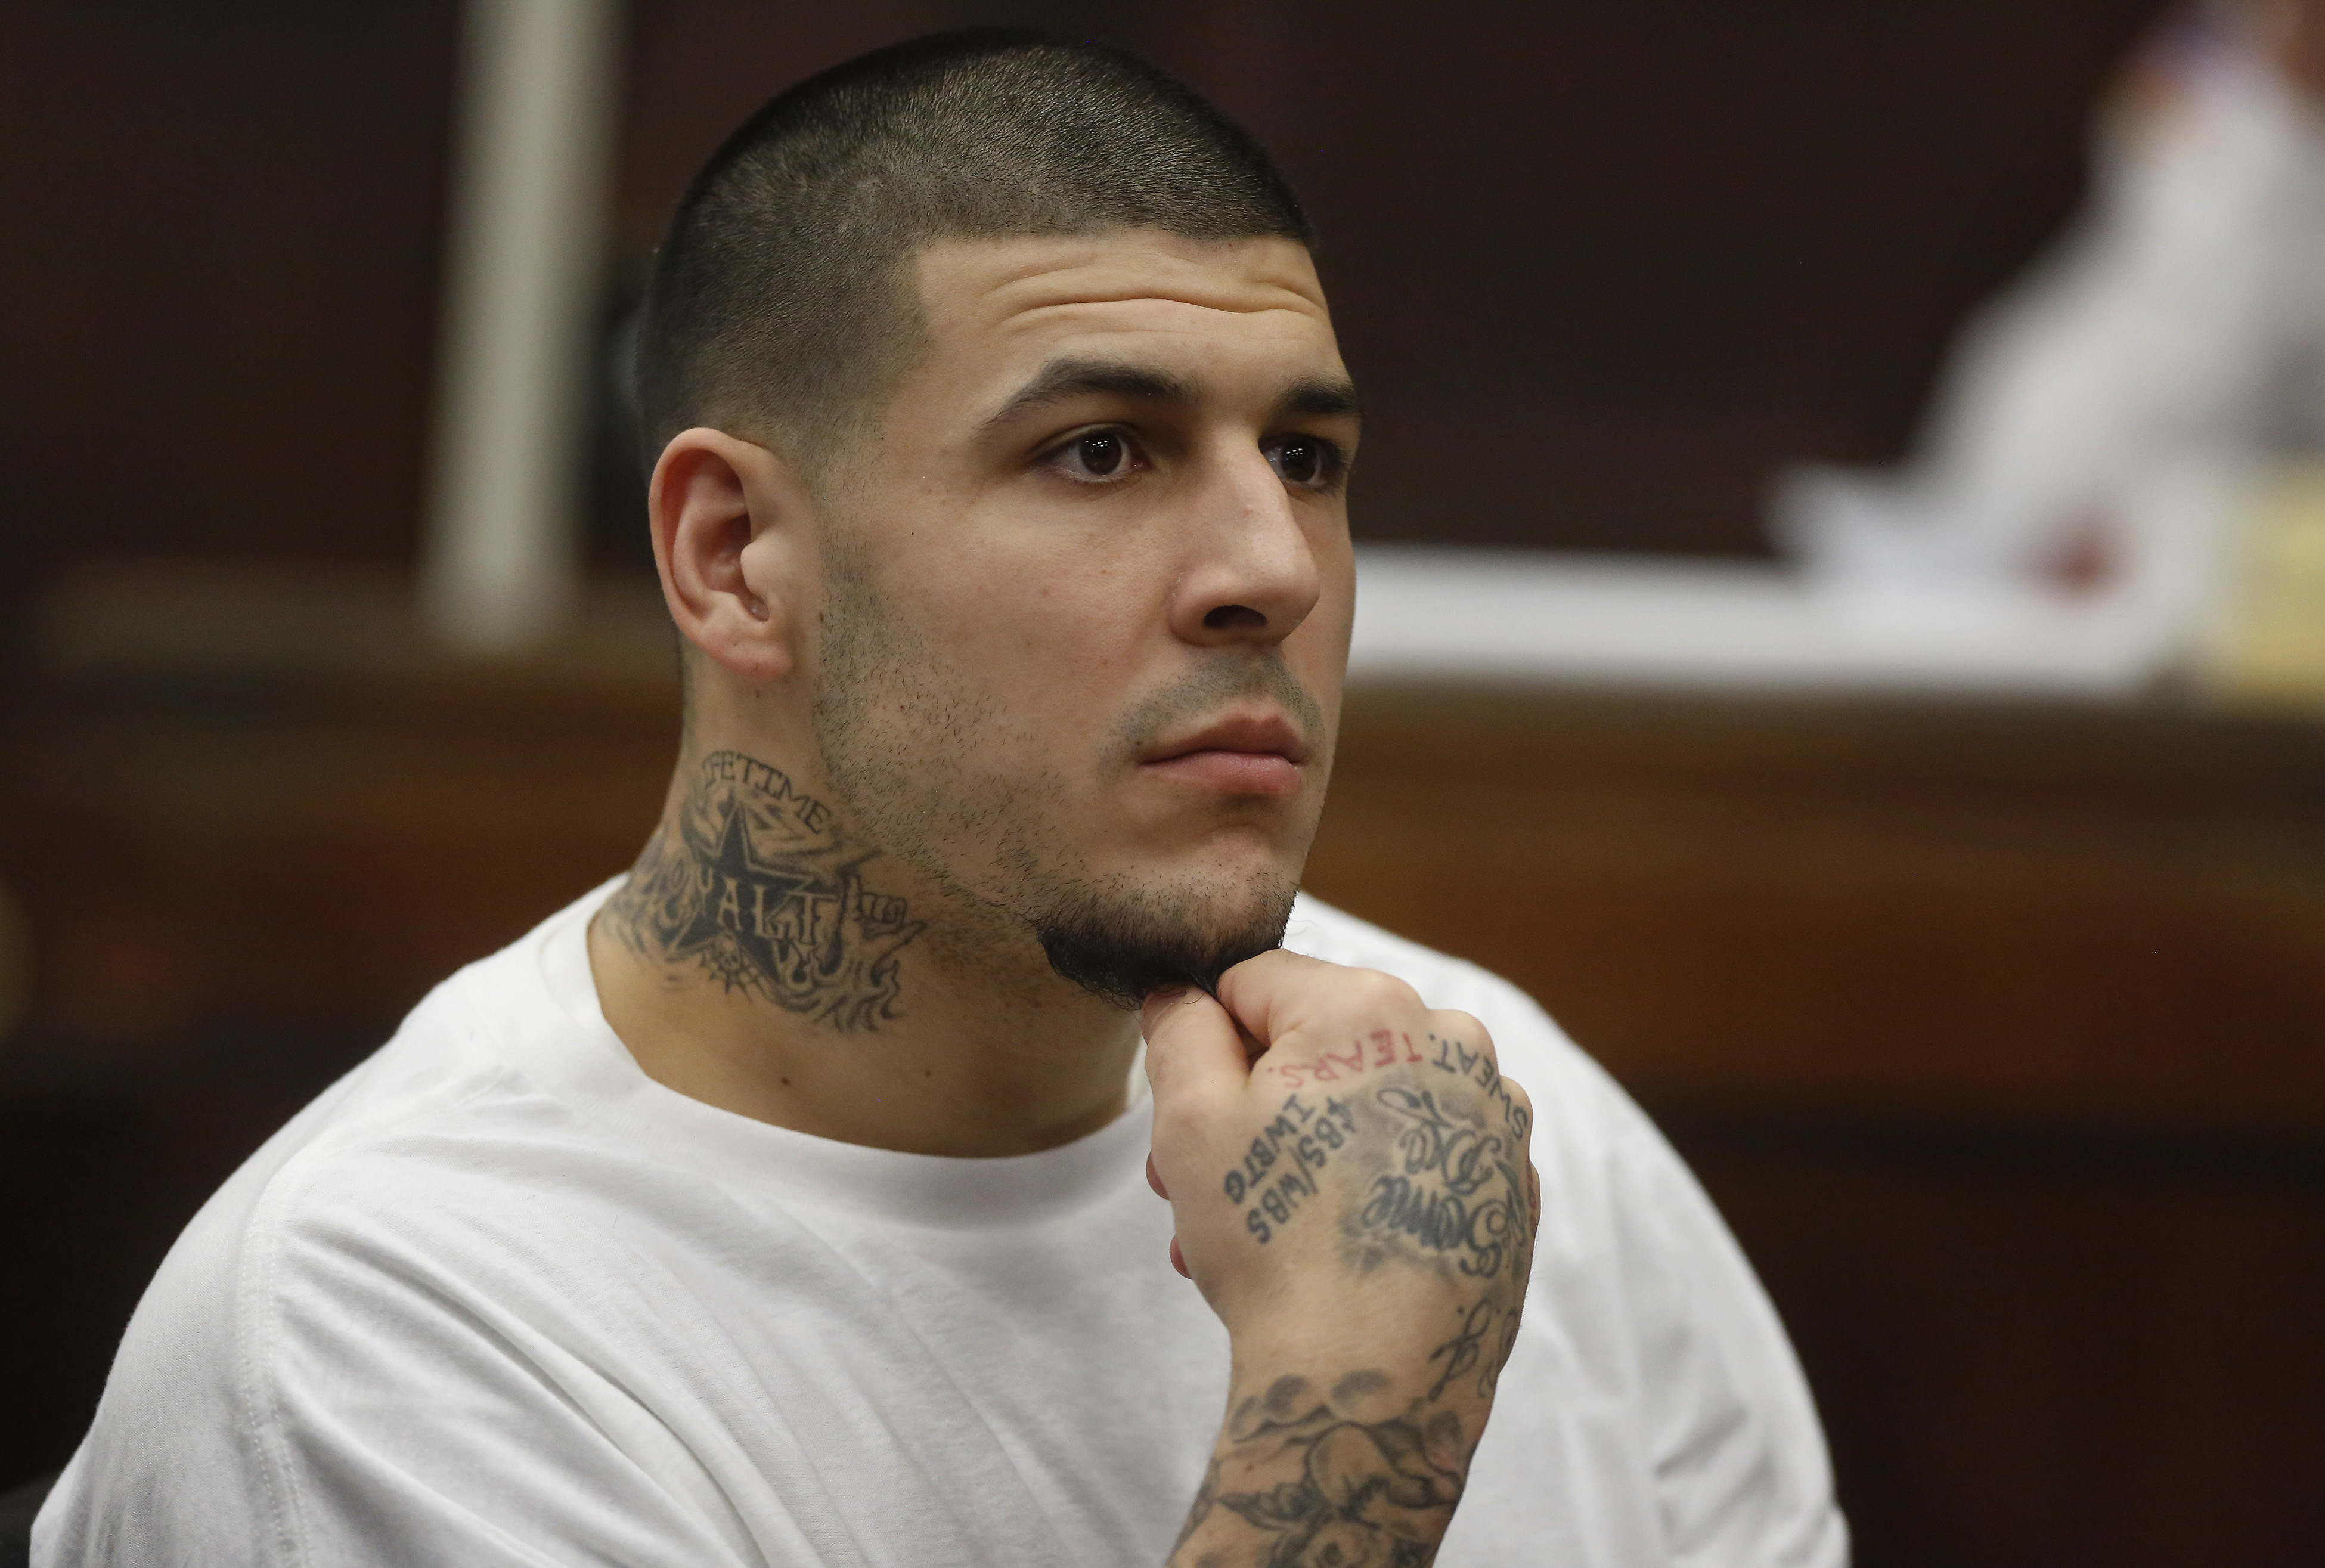 FILE - In this Dec. 22, 2015 file photo, former New England Patriots NFL football player Aaron Hernandez attends a pre-trial hearing at Suffolk Superior Court in Boston. Hernandez is expected to appear in court Thursday, July 21, 2016, with new lawyers to defend him in the 2012 slayings of two men outside a Boston nightclub. (AP Photo/Steven Senne, Pool, File)